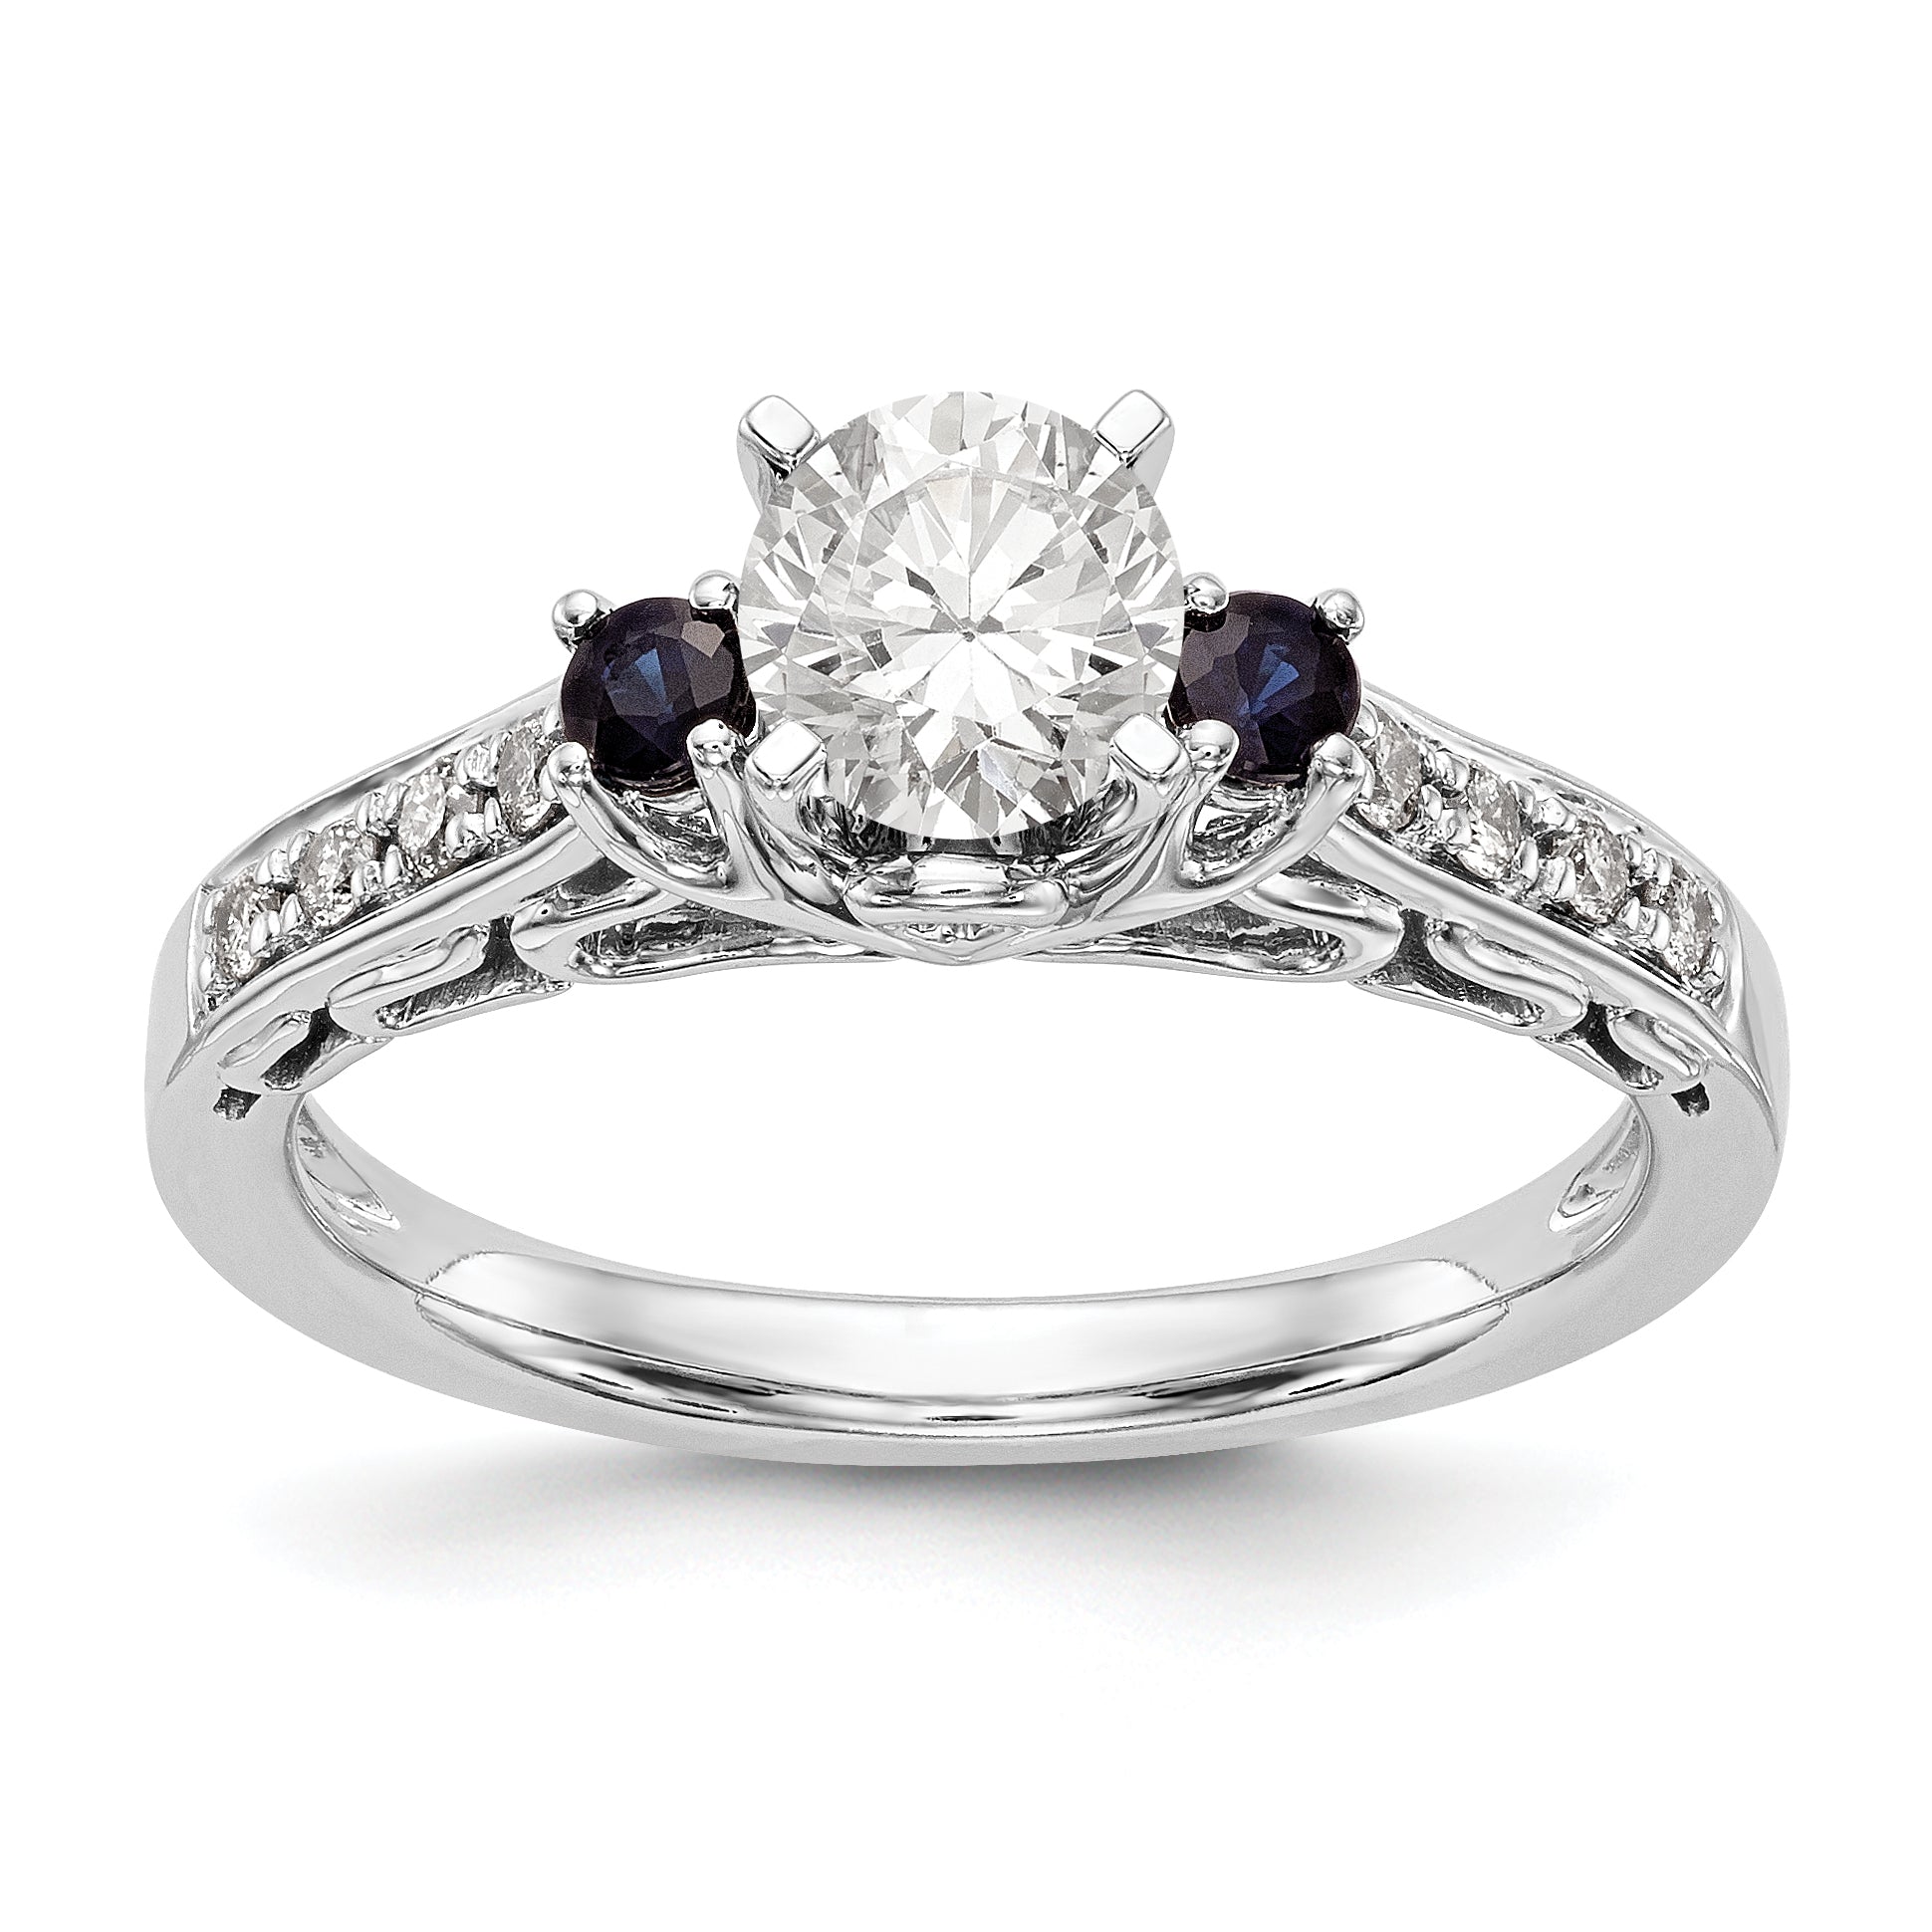 Image of ID 1 14k White Gold 3 stone Dia Peg Set with Sapphire CZ Engagement Ring